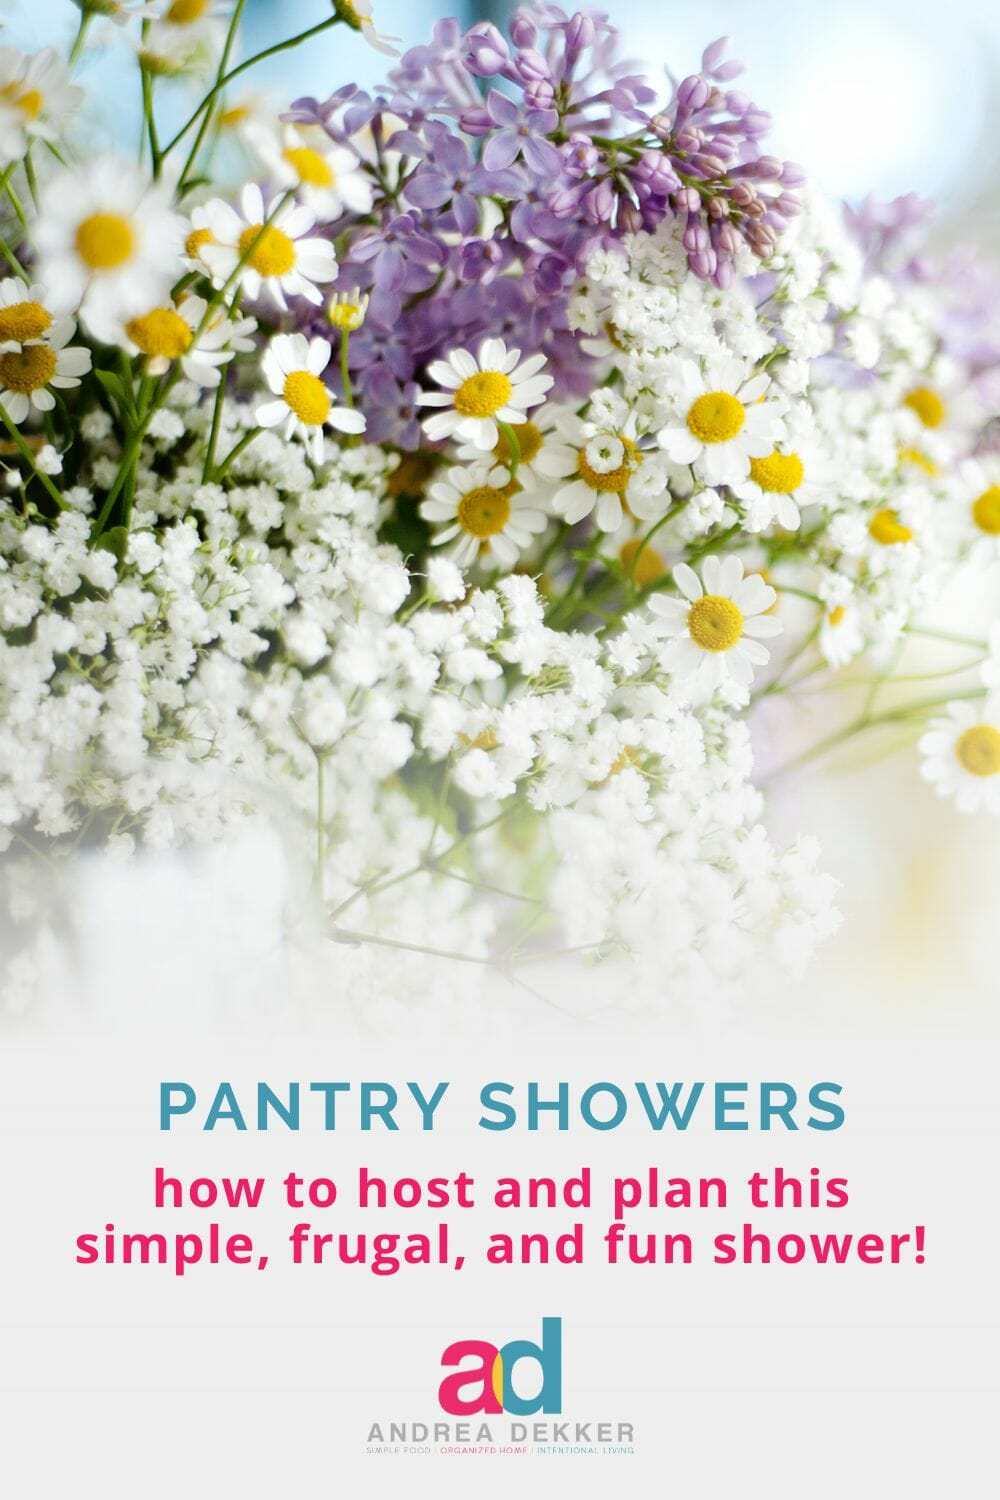 If you're looking for fun, frugal, practical, easy-to-put-together shower ideas for almost any new couple (or new homeowner) host a Pantry Shower! via @andreadekker